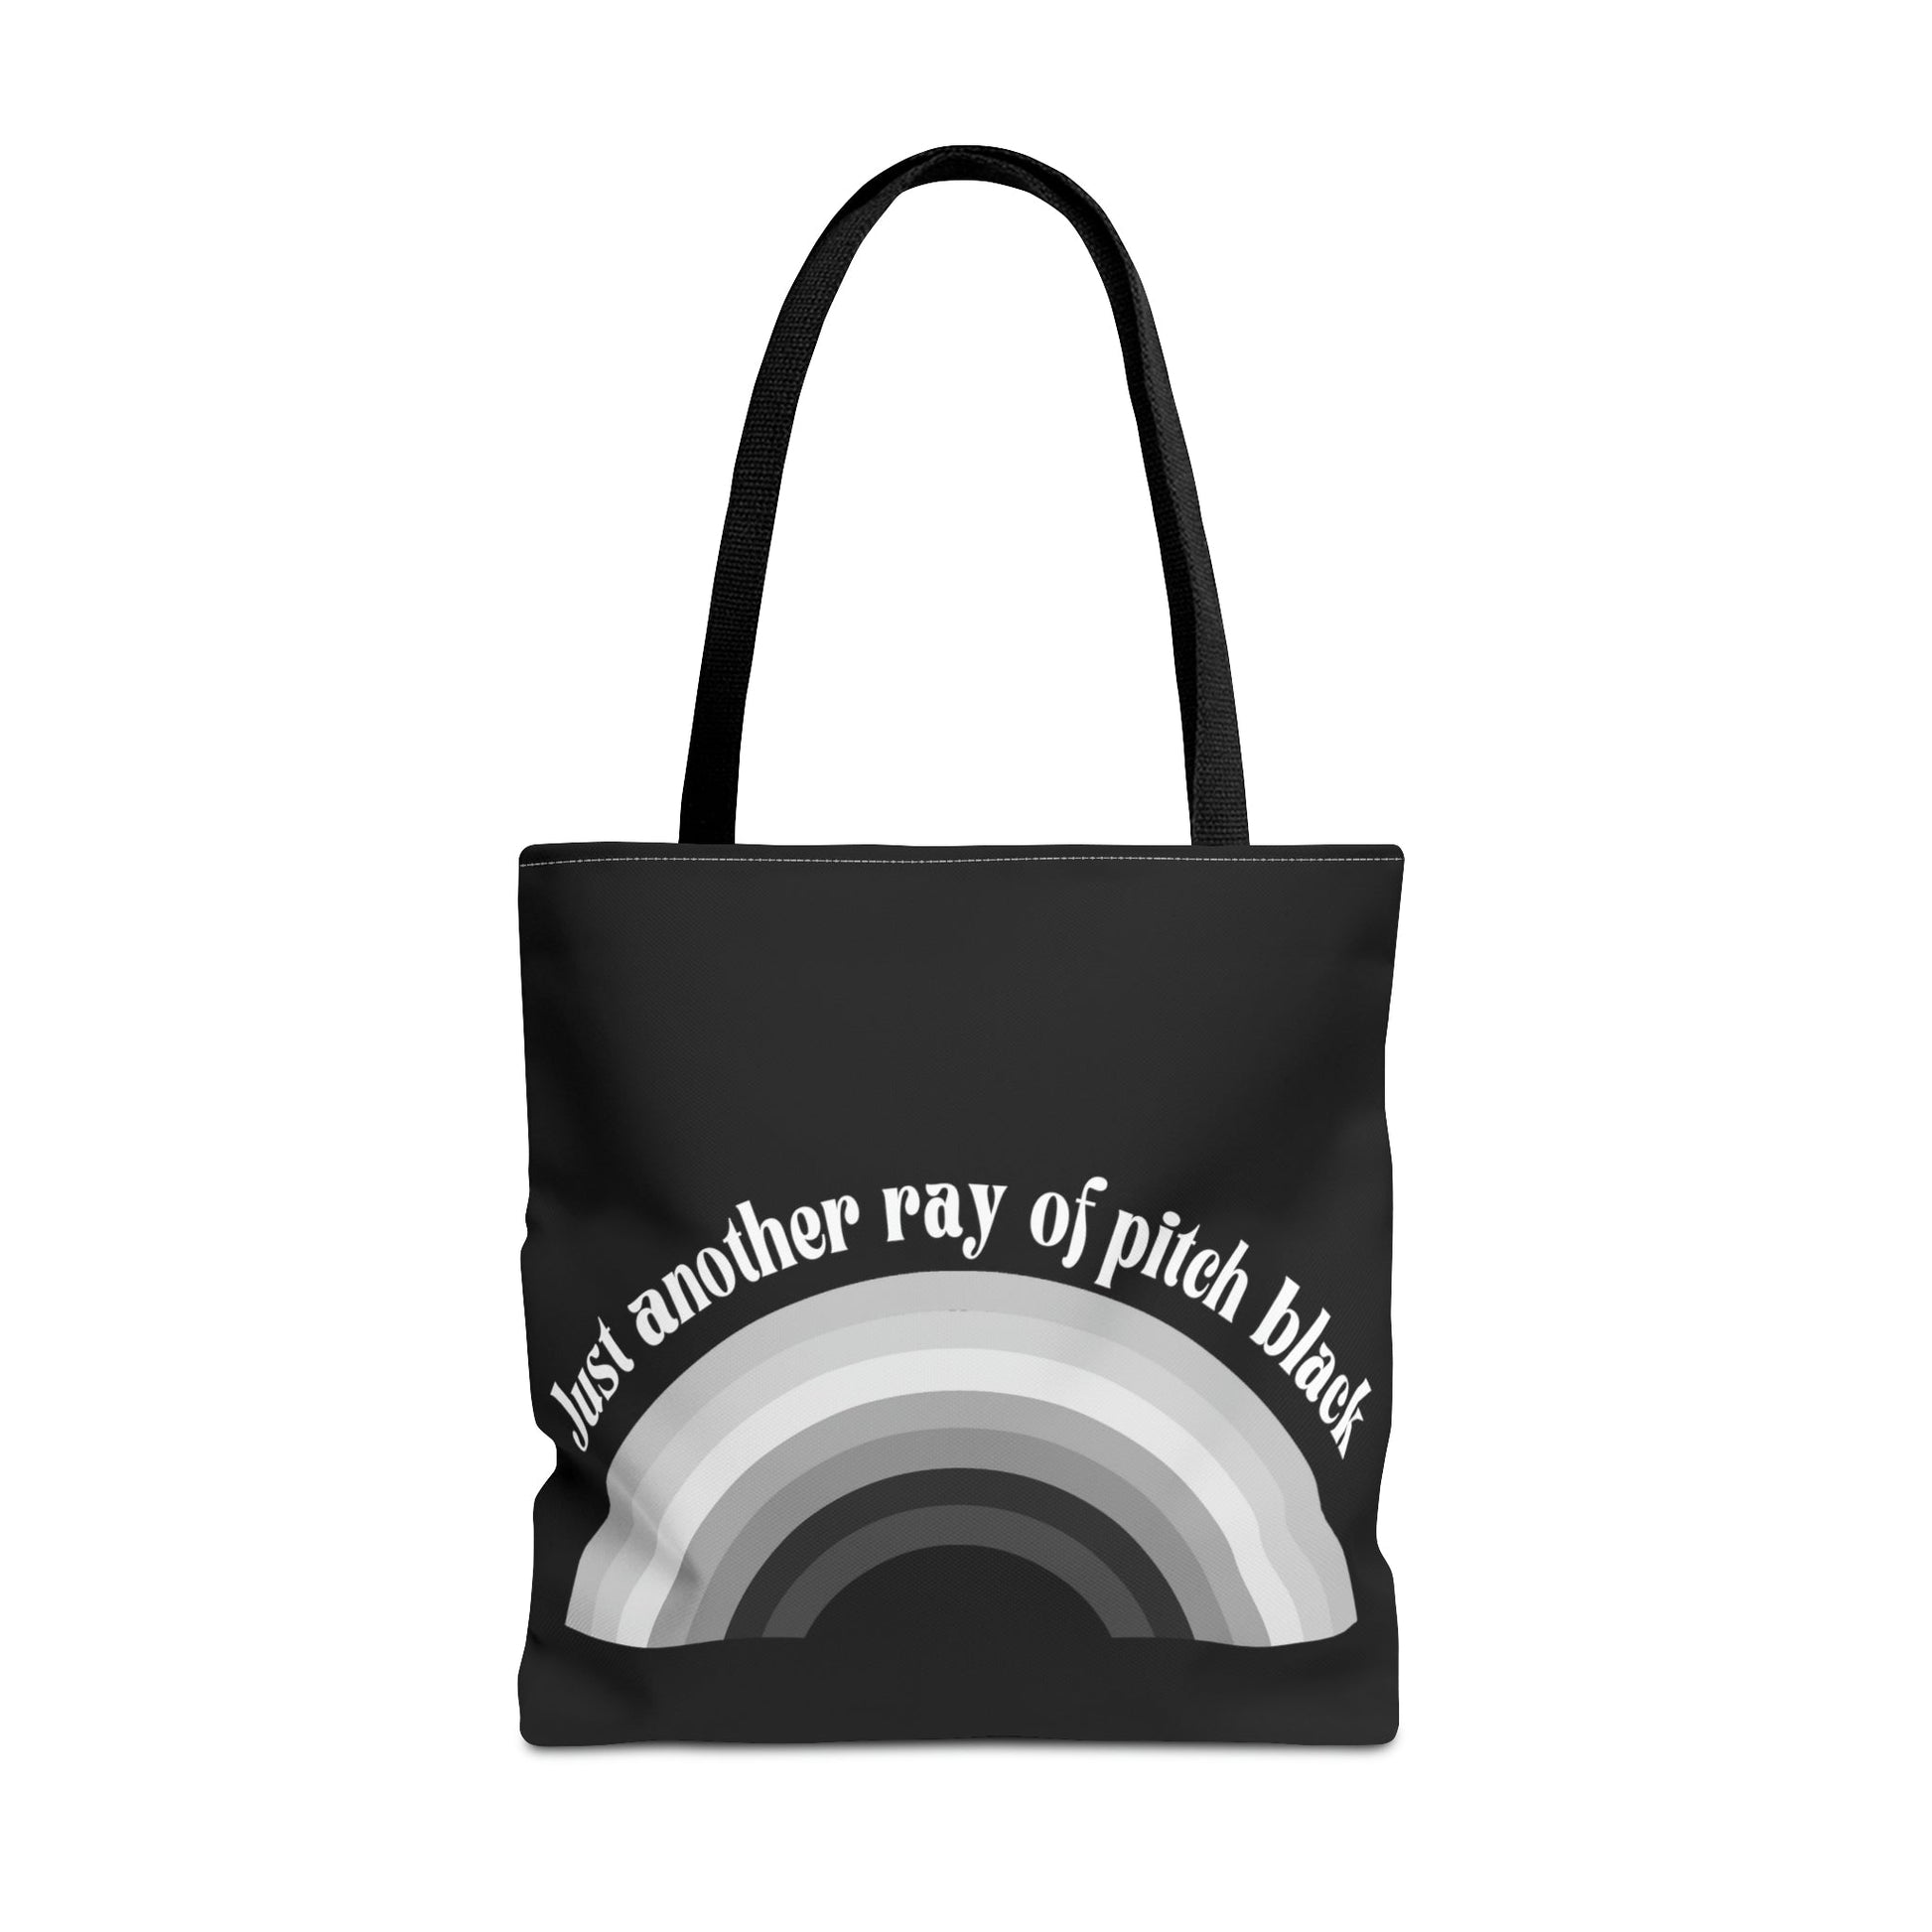 Just Another Ray of Pitch Black Tote Bag in Black | 18" x 18"